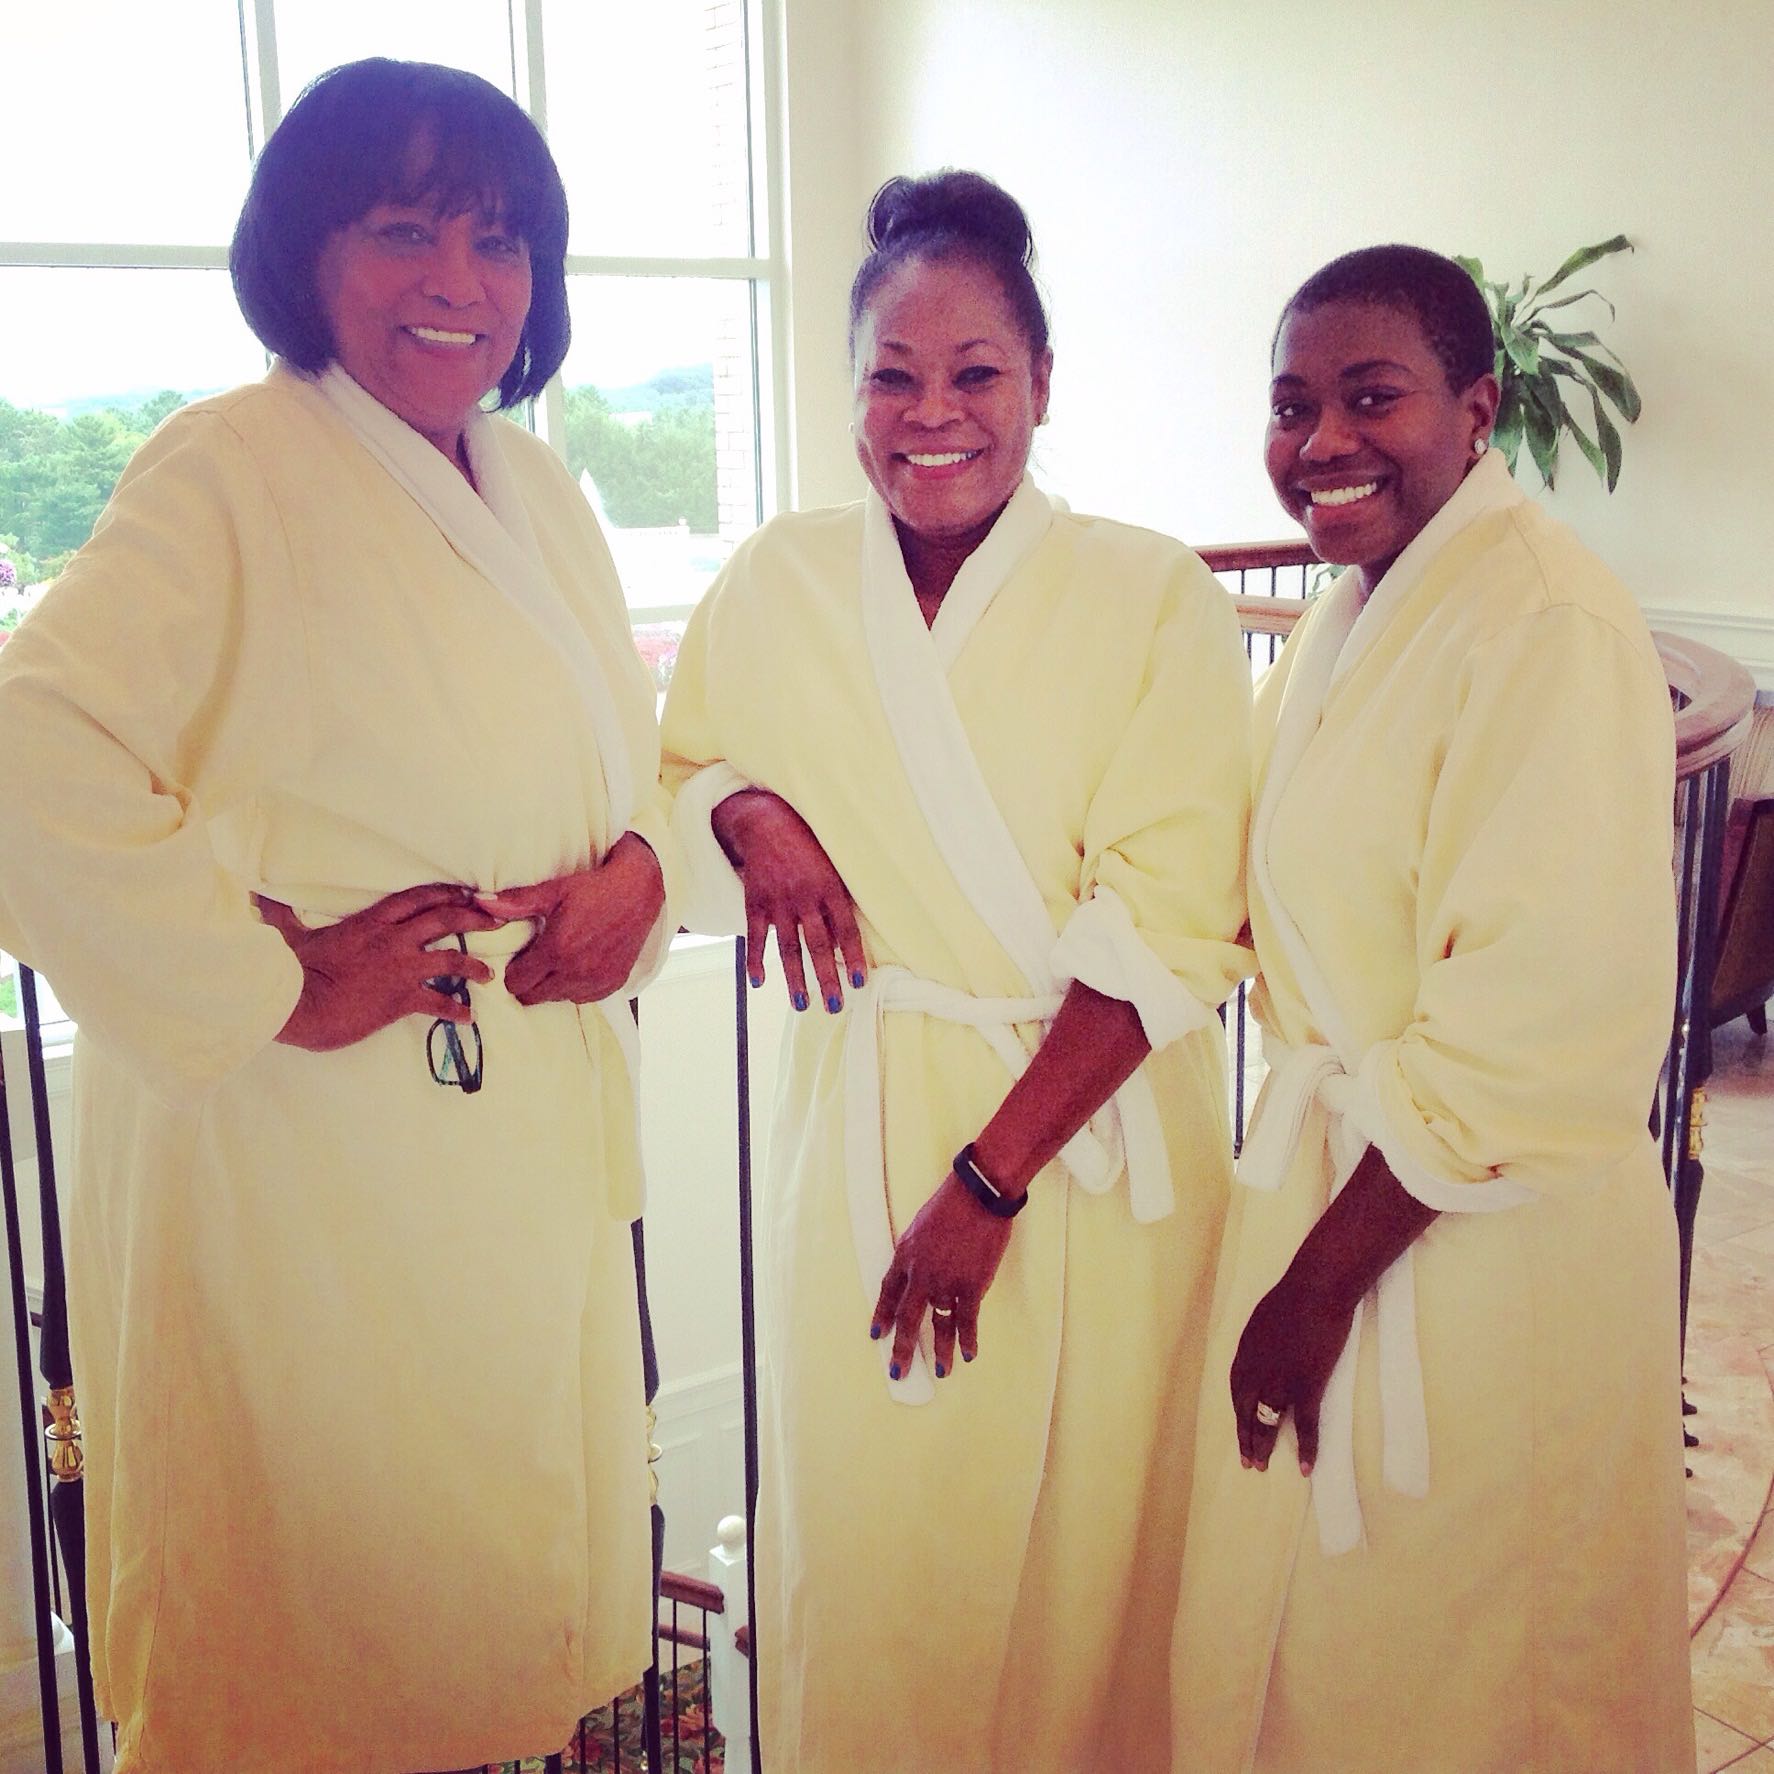 Chocolate Goodness at The Spa At The Hotel Hershey on Saturday, September 17, 2016 to celebrate my birthday with Cynthia Lawson and Toi Sweeney.